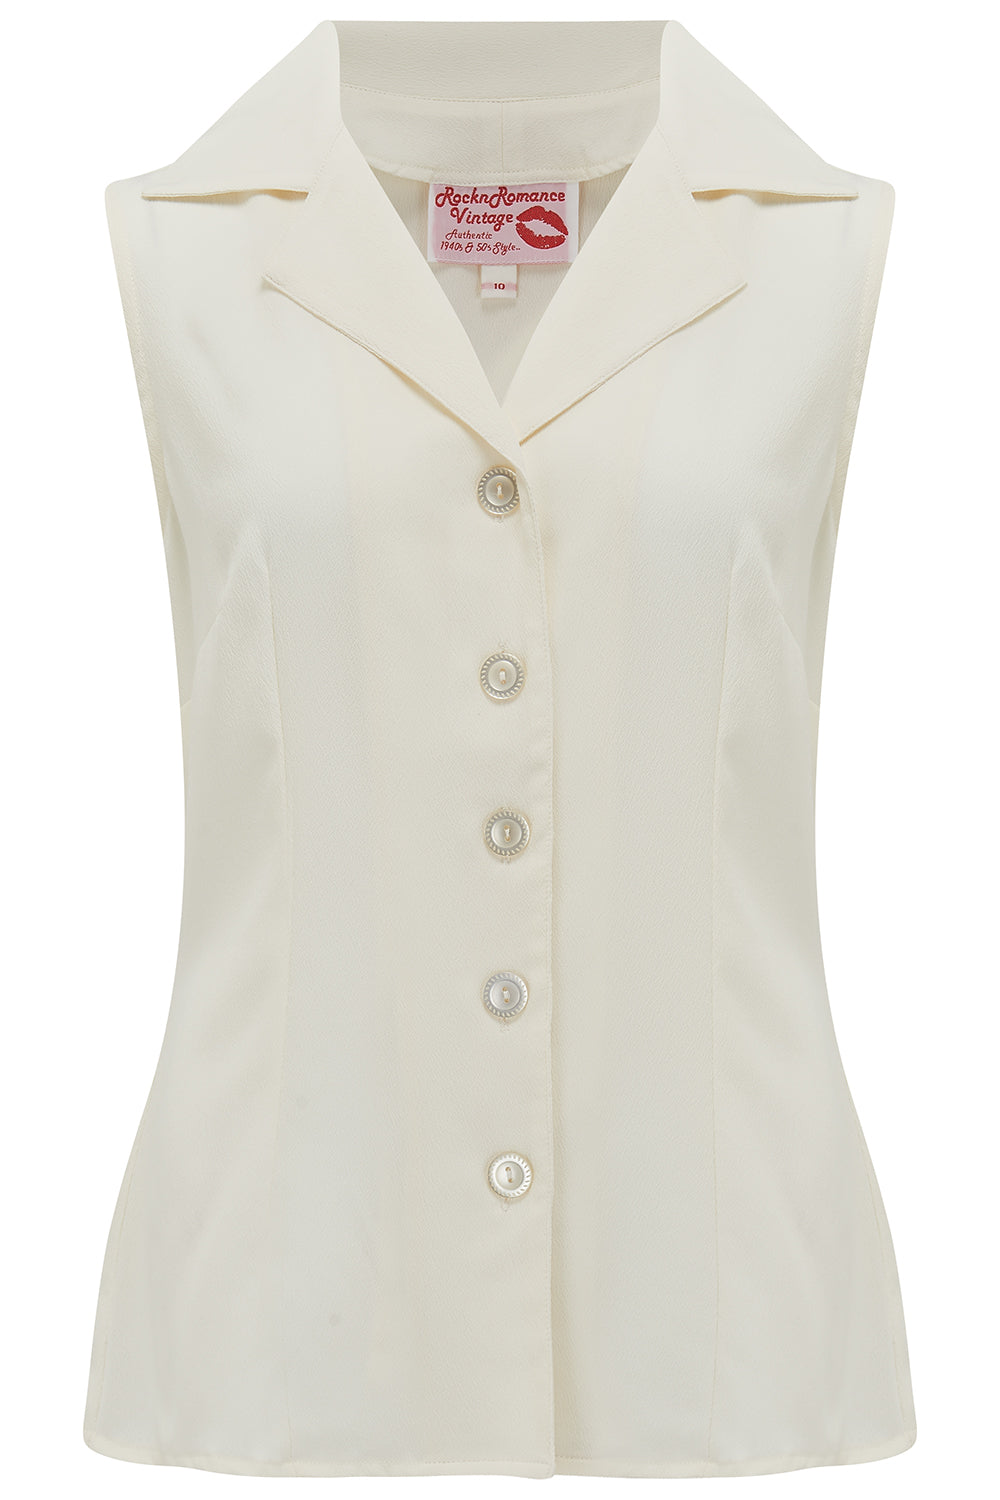 50s Shirts & Tops | 1950s Blouses & Knitwear The Gladys Sleeveless Summer Blouse in Antique White Classic Vintage 1950s Inspired Style £29.95 AT vintagedancer.com